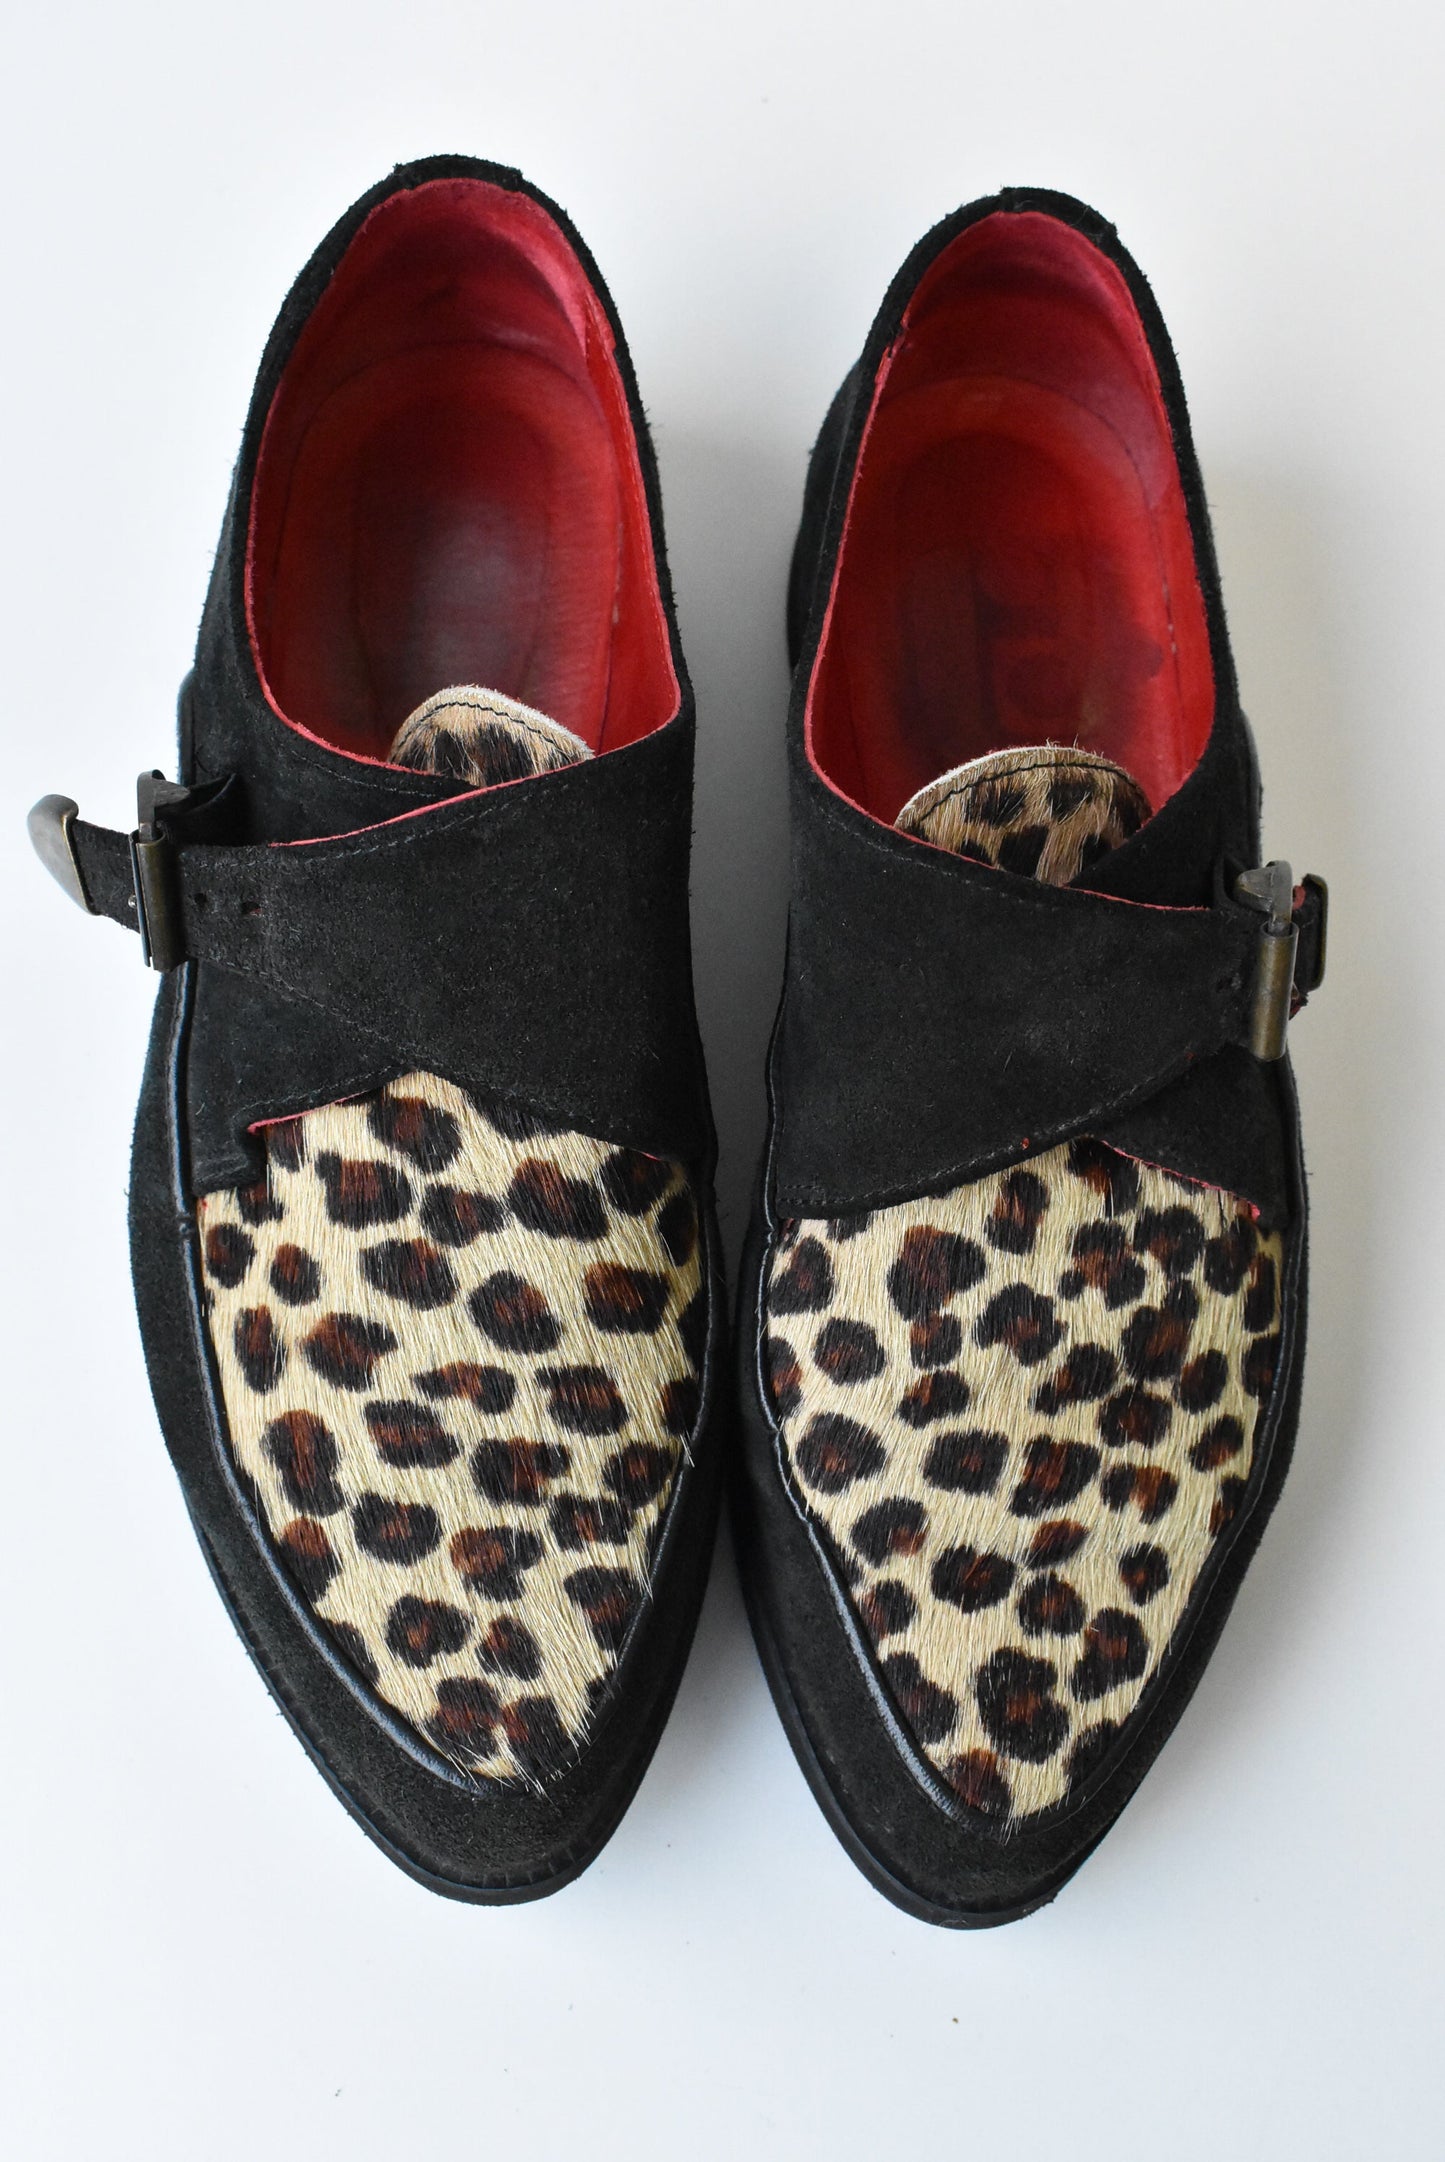 Red or Dead women's leather and suede cheetah print shoes, size 38